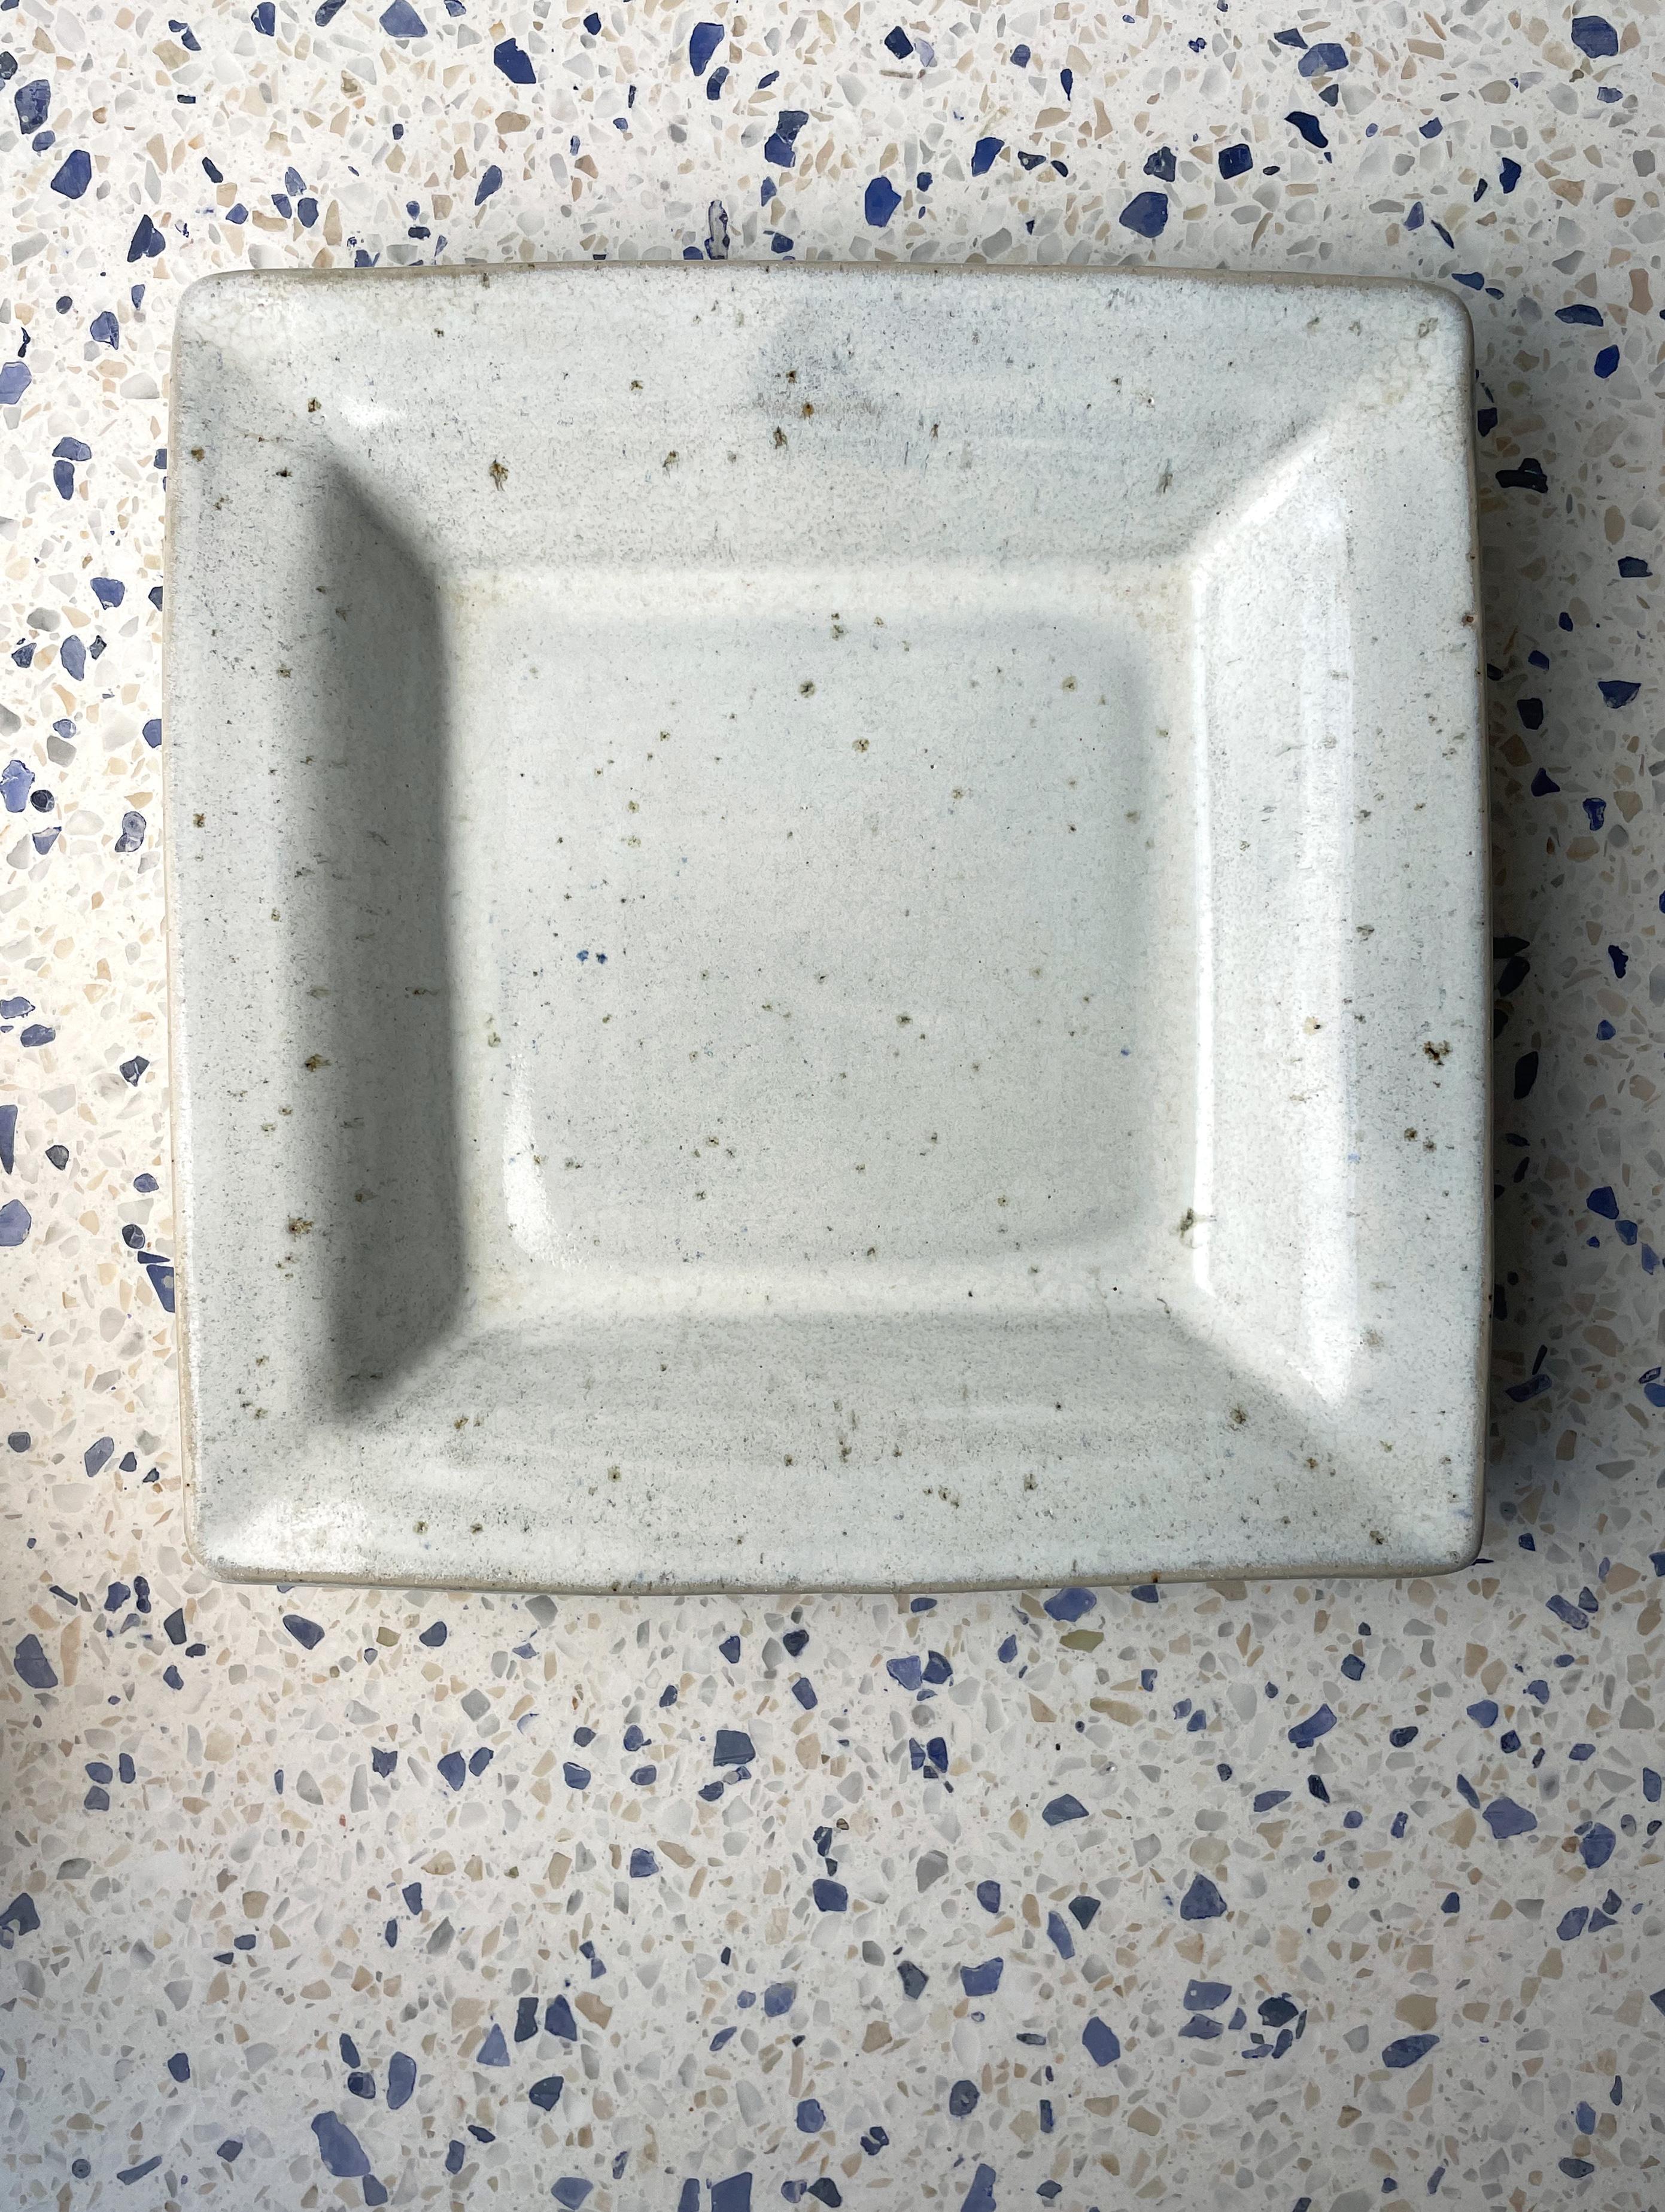 Beautiful simplistic midcentury modernist piece from the 1970s by Danish artist Finn Lynggaard (1930-2011). Soft square shaped bowl / plate / centerpiece with rounded corners. Light gray glaze with a light pastel blue tint. Signed and stamped under